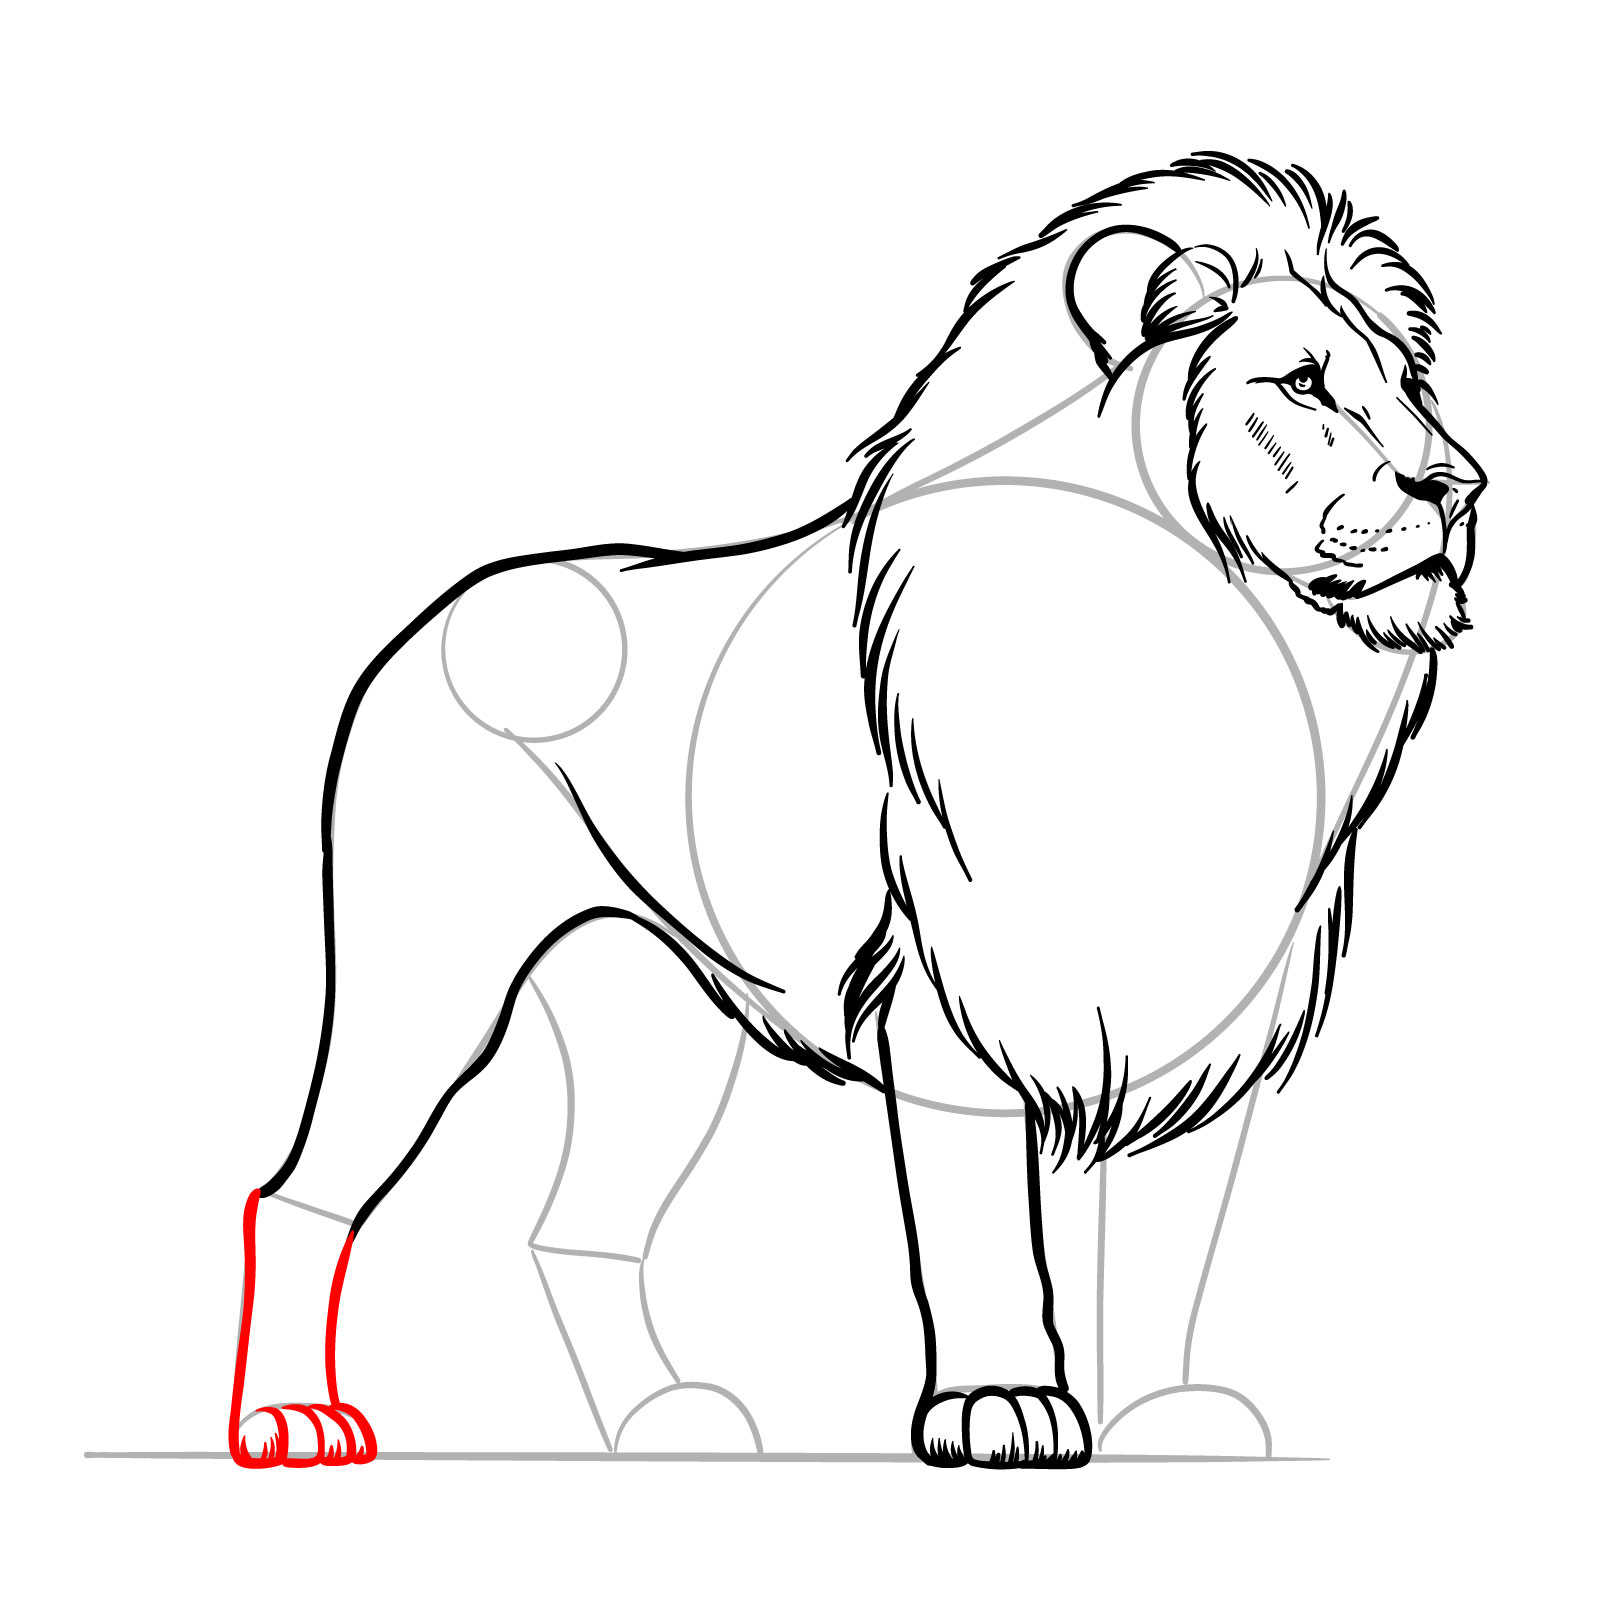 Completing the rear right leg in a standing lion drawing tutorial - step 11